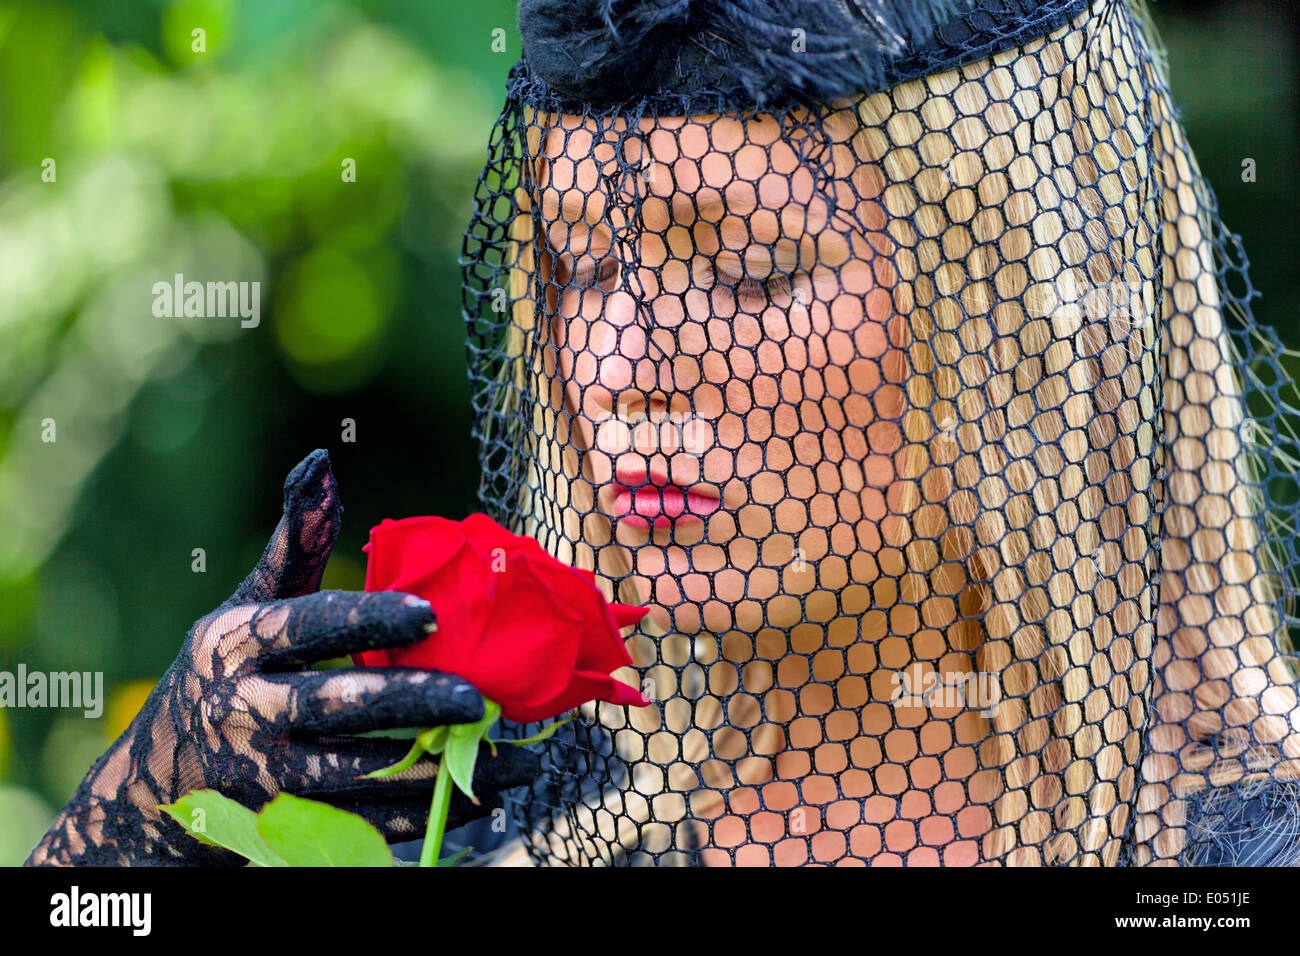 A young, mourning widow with veil and rose. Death and inheritance., Eine junge, trauernde Witwe mit Schleier und Rose. Todesfall Stock Photo